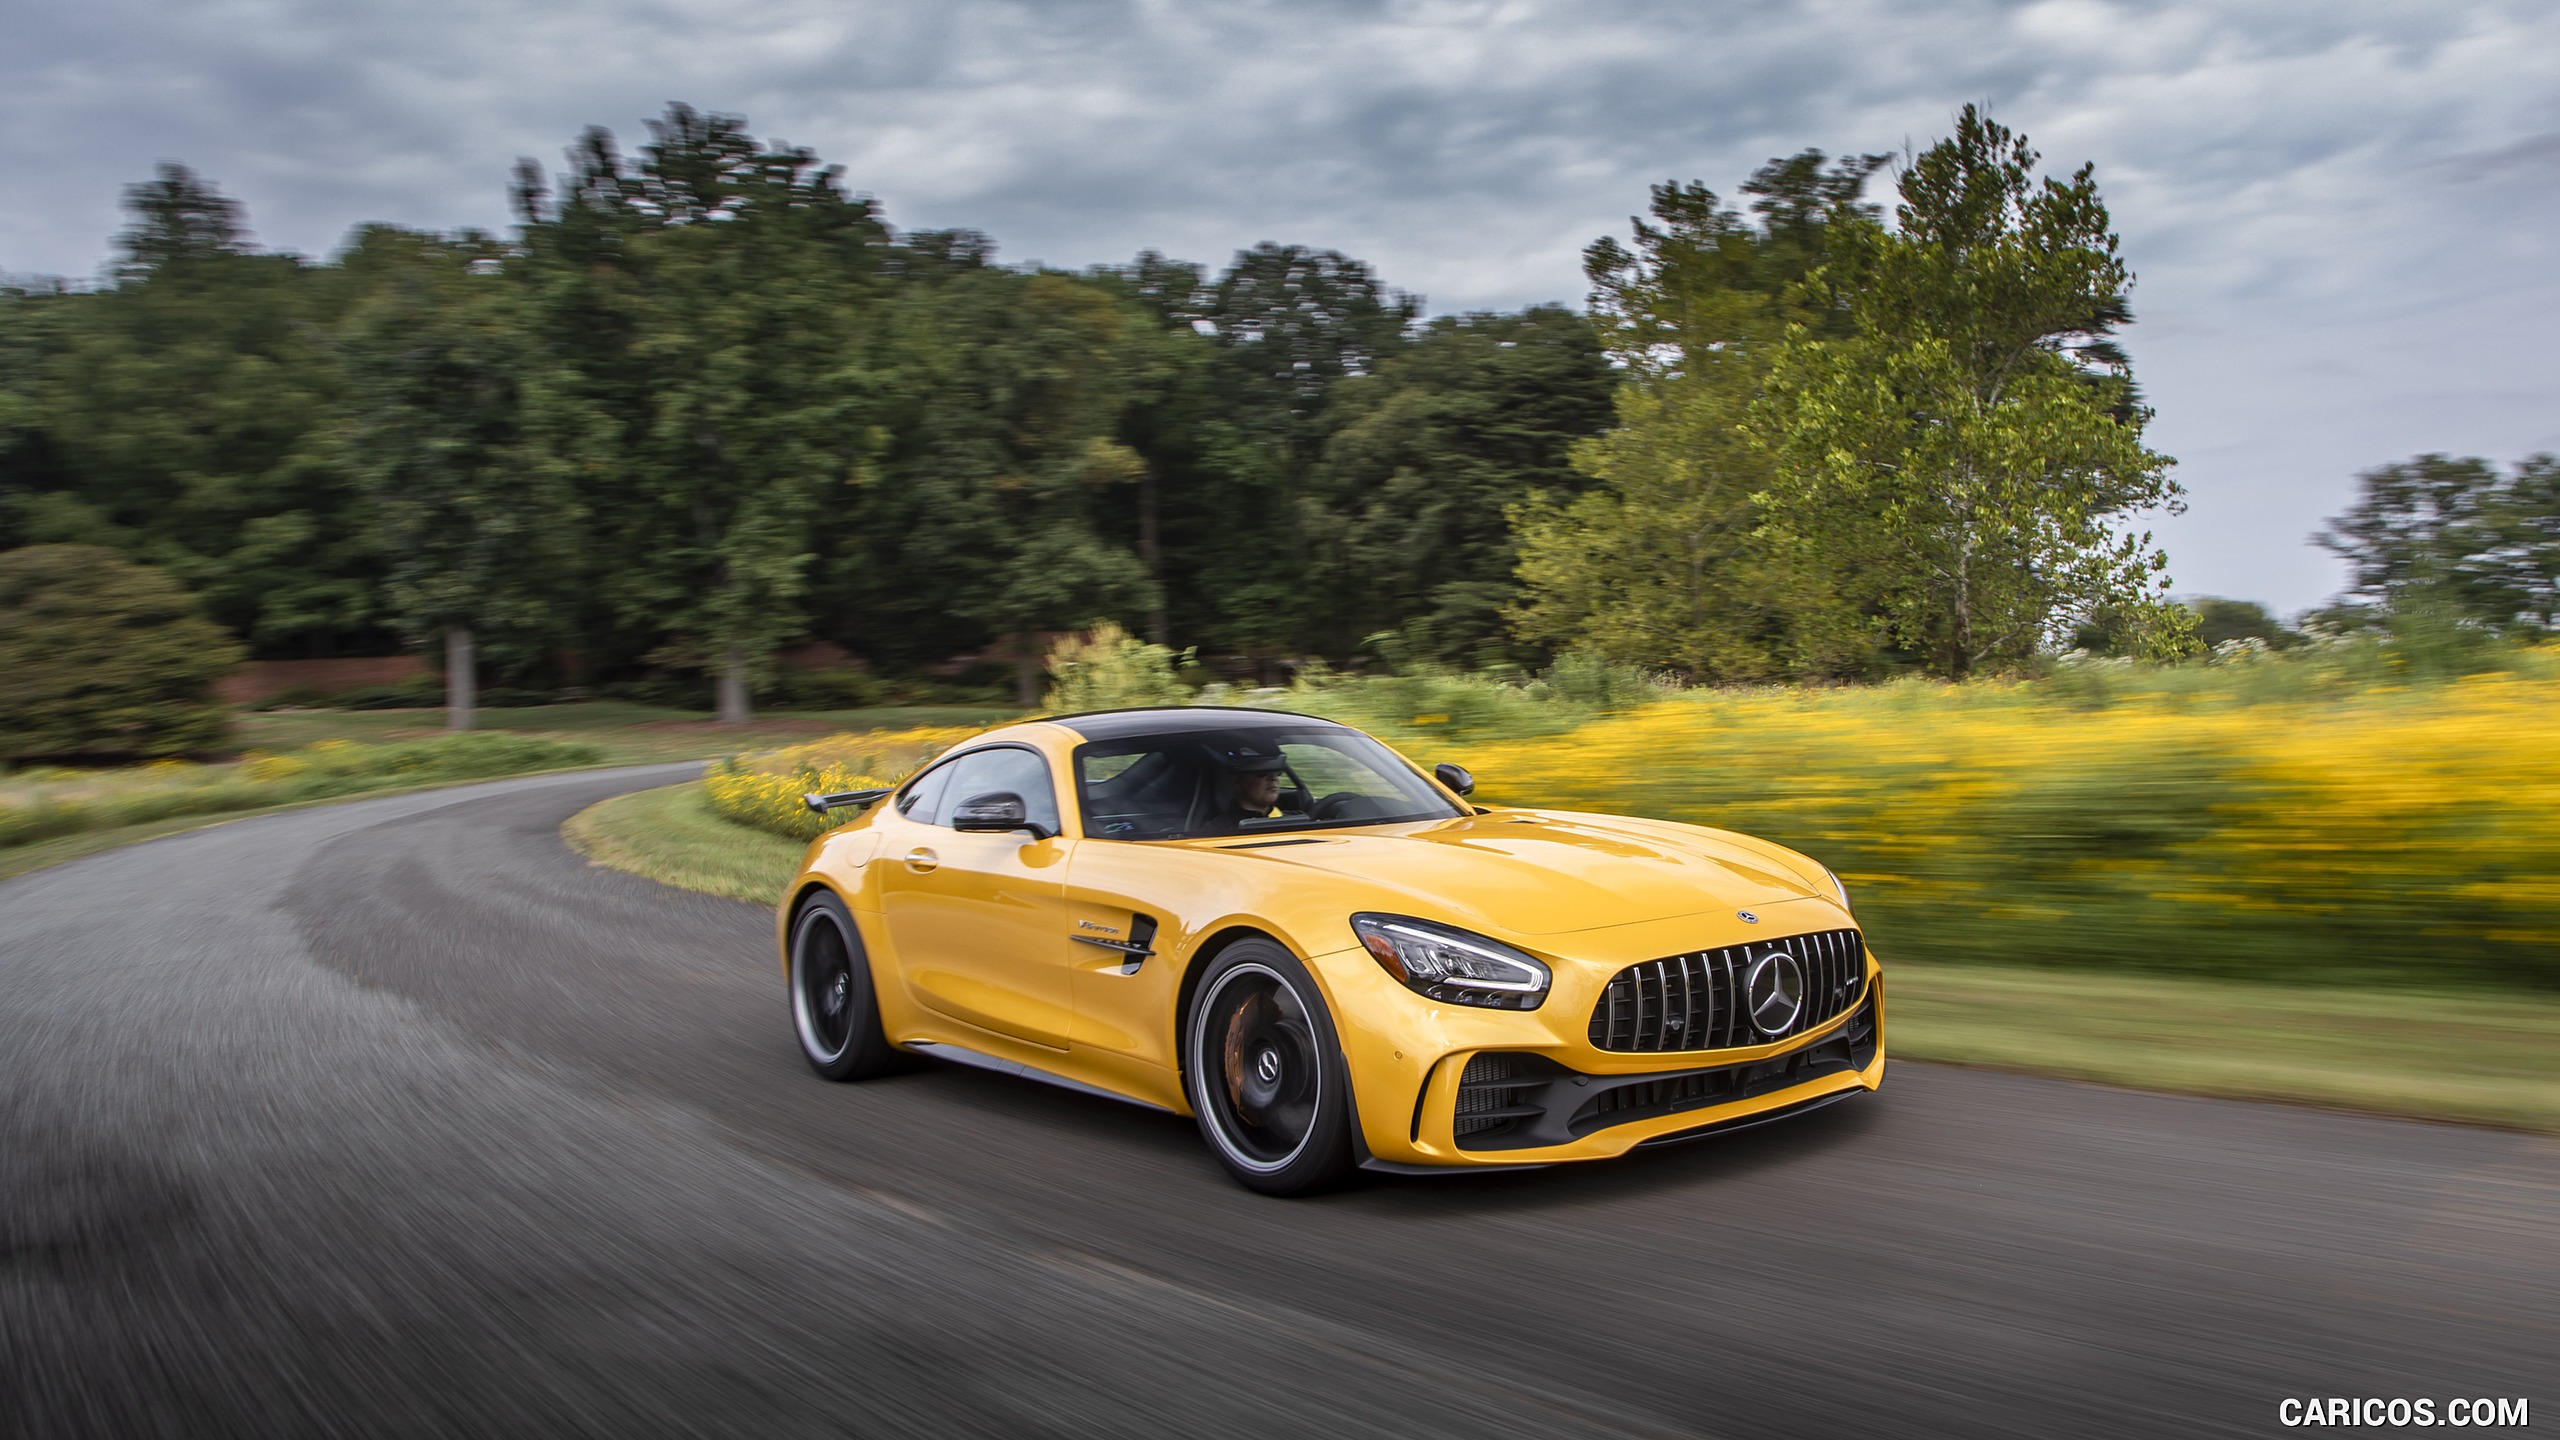 2020 Mercedes-AMG GT R Coupe (US-Spec) - Front Three-Quarter, #268 of 328